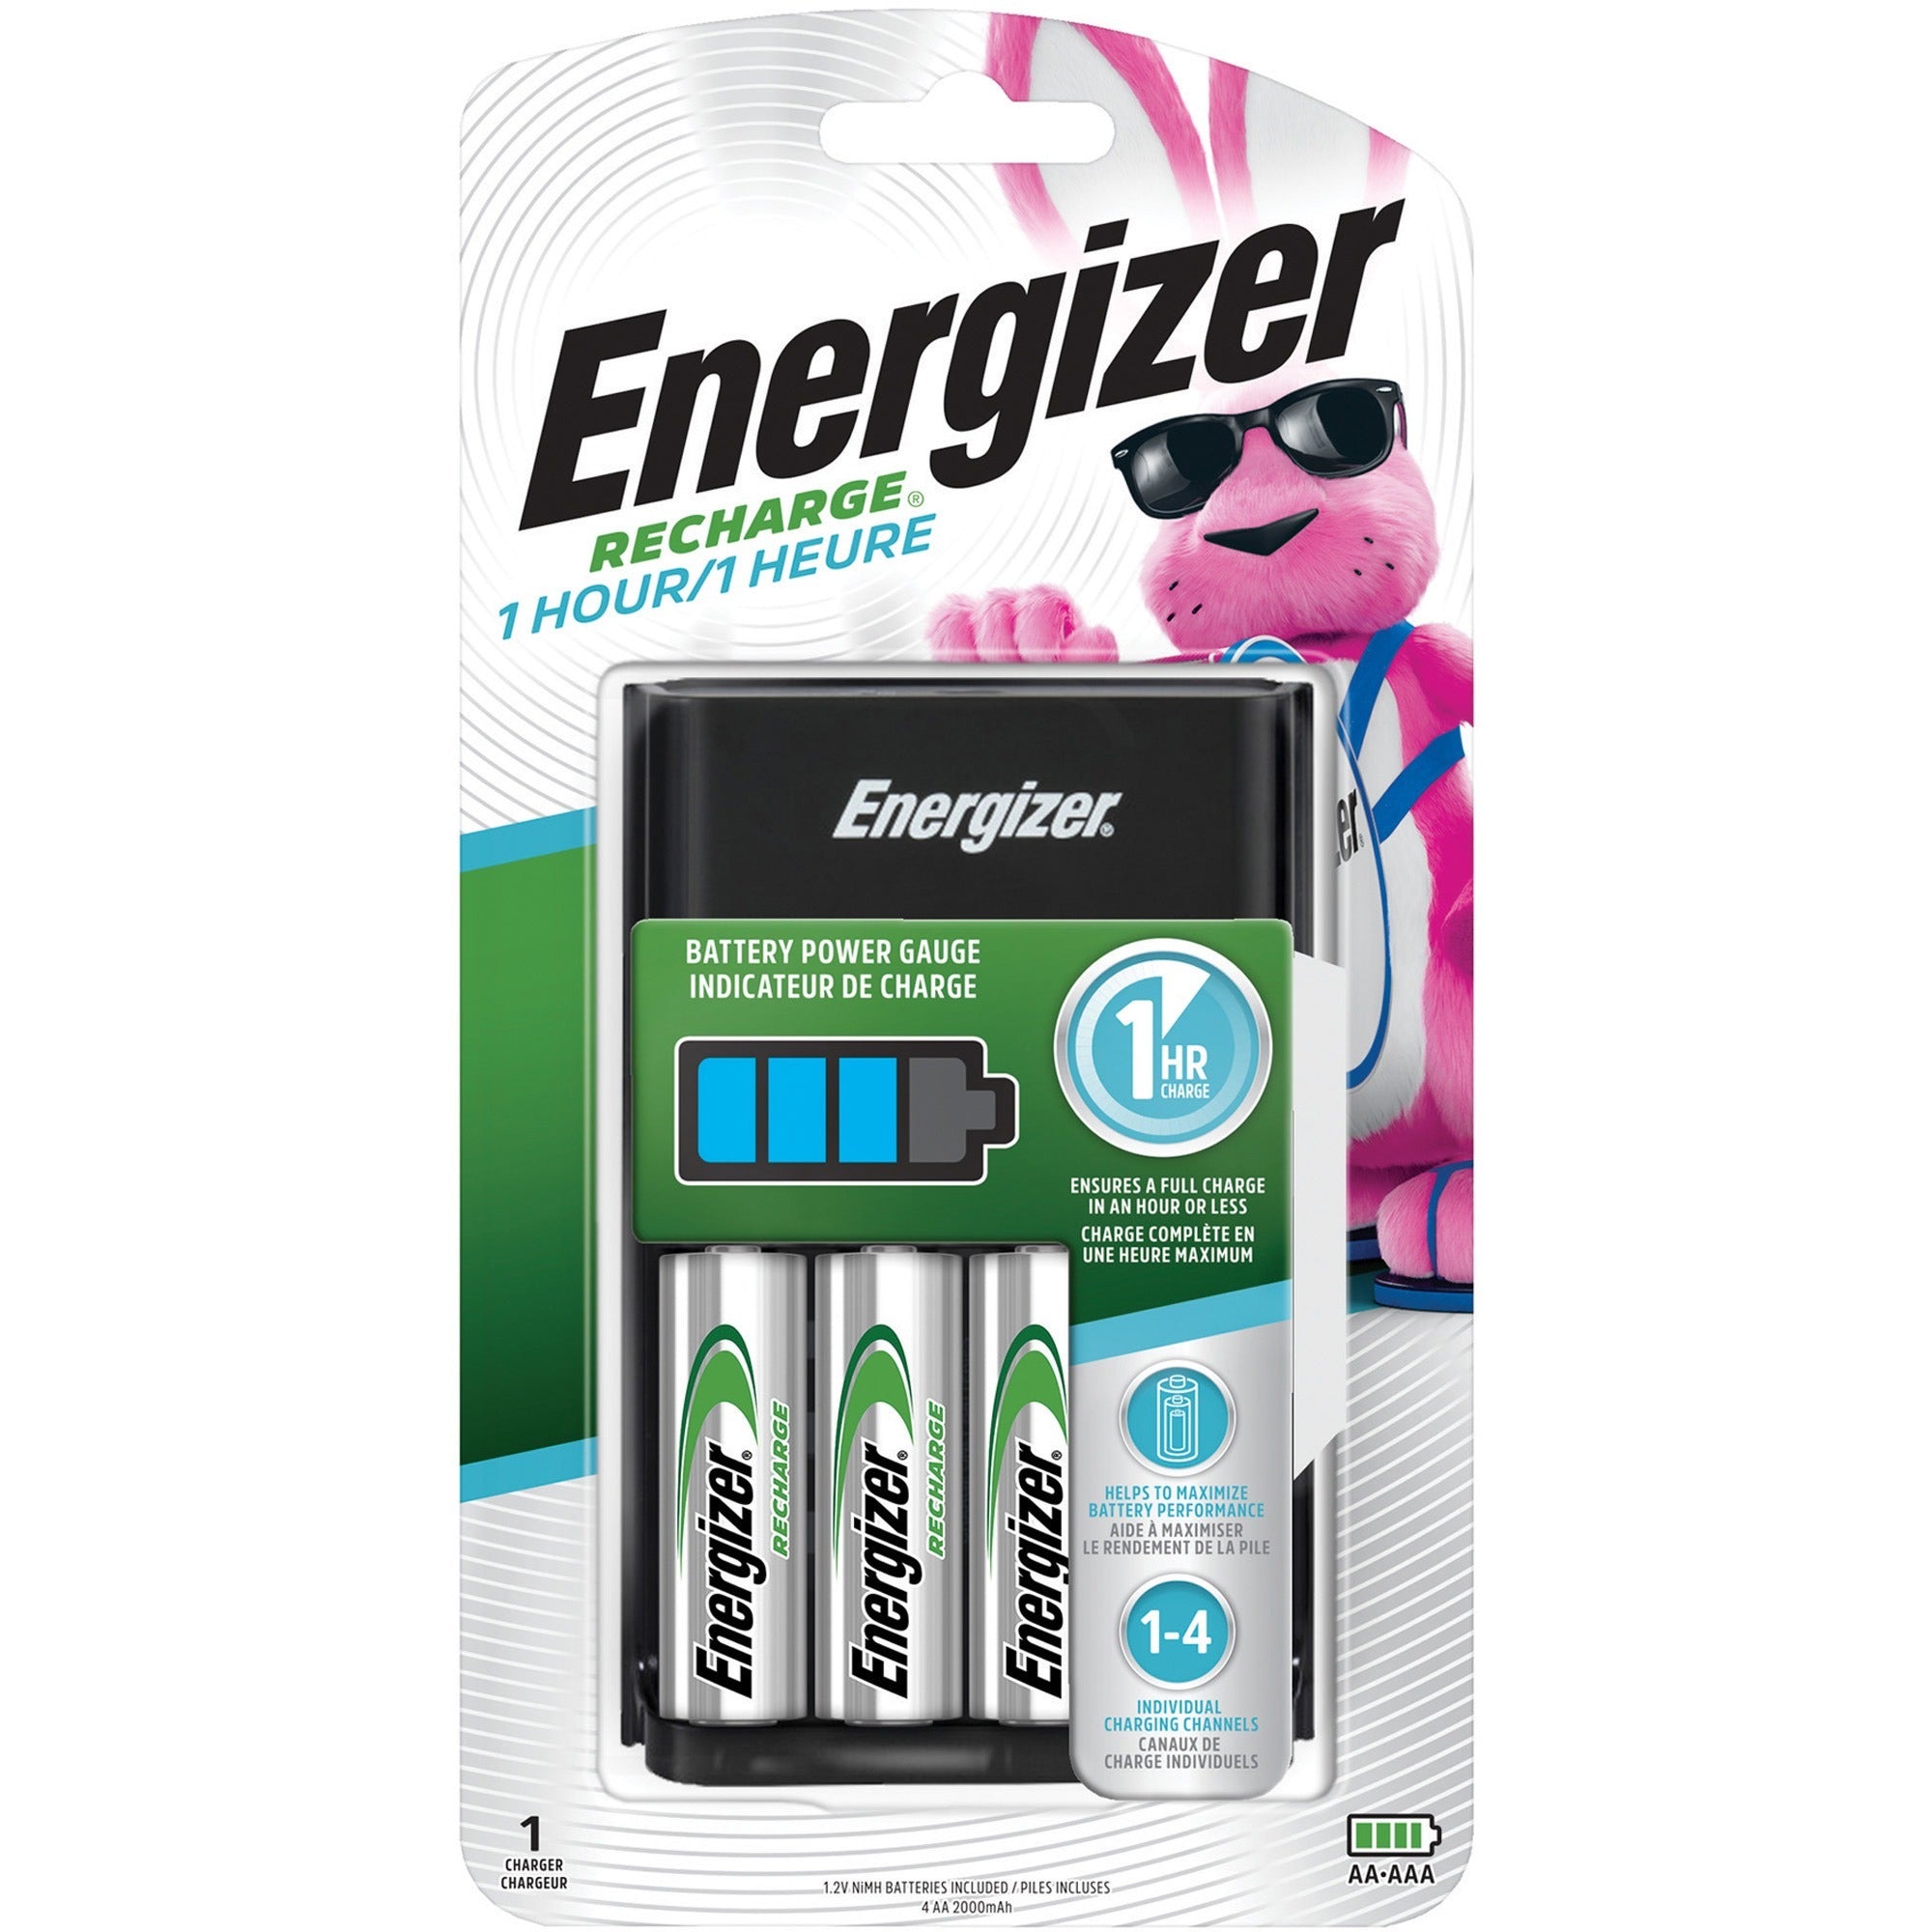 energizer-recharge-battery-charger-with-2-aa-and-2-aaa-nimh-batteries-3-carton-1-hour-charging-4-aa-aaa_evech1hrwb4ct - 1